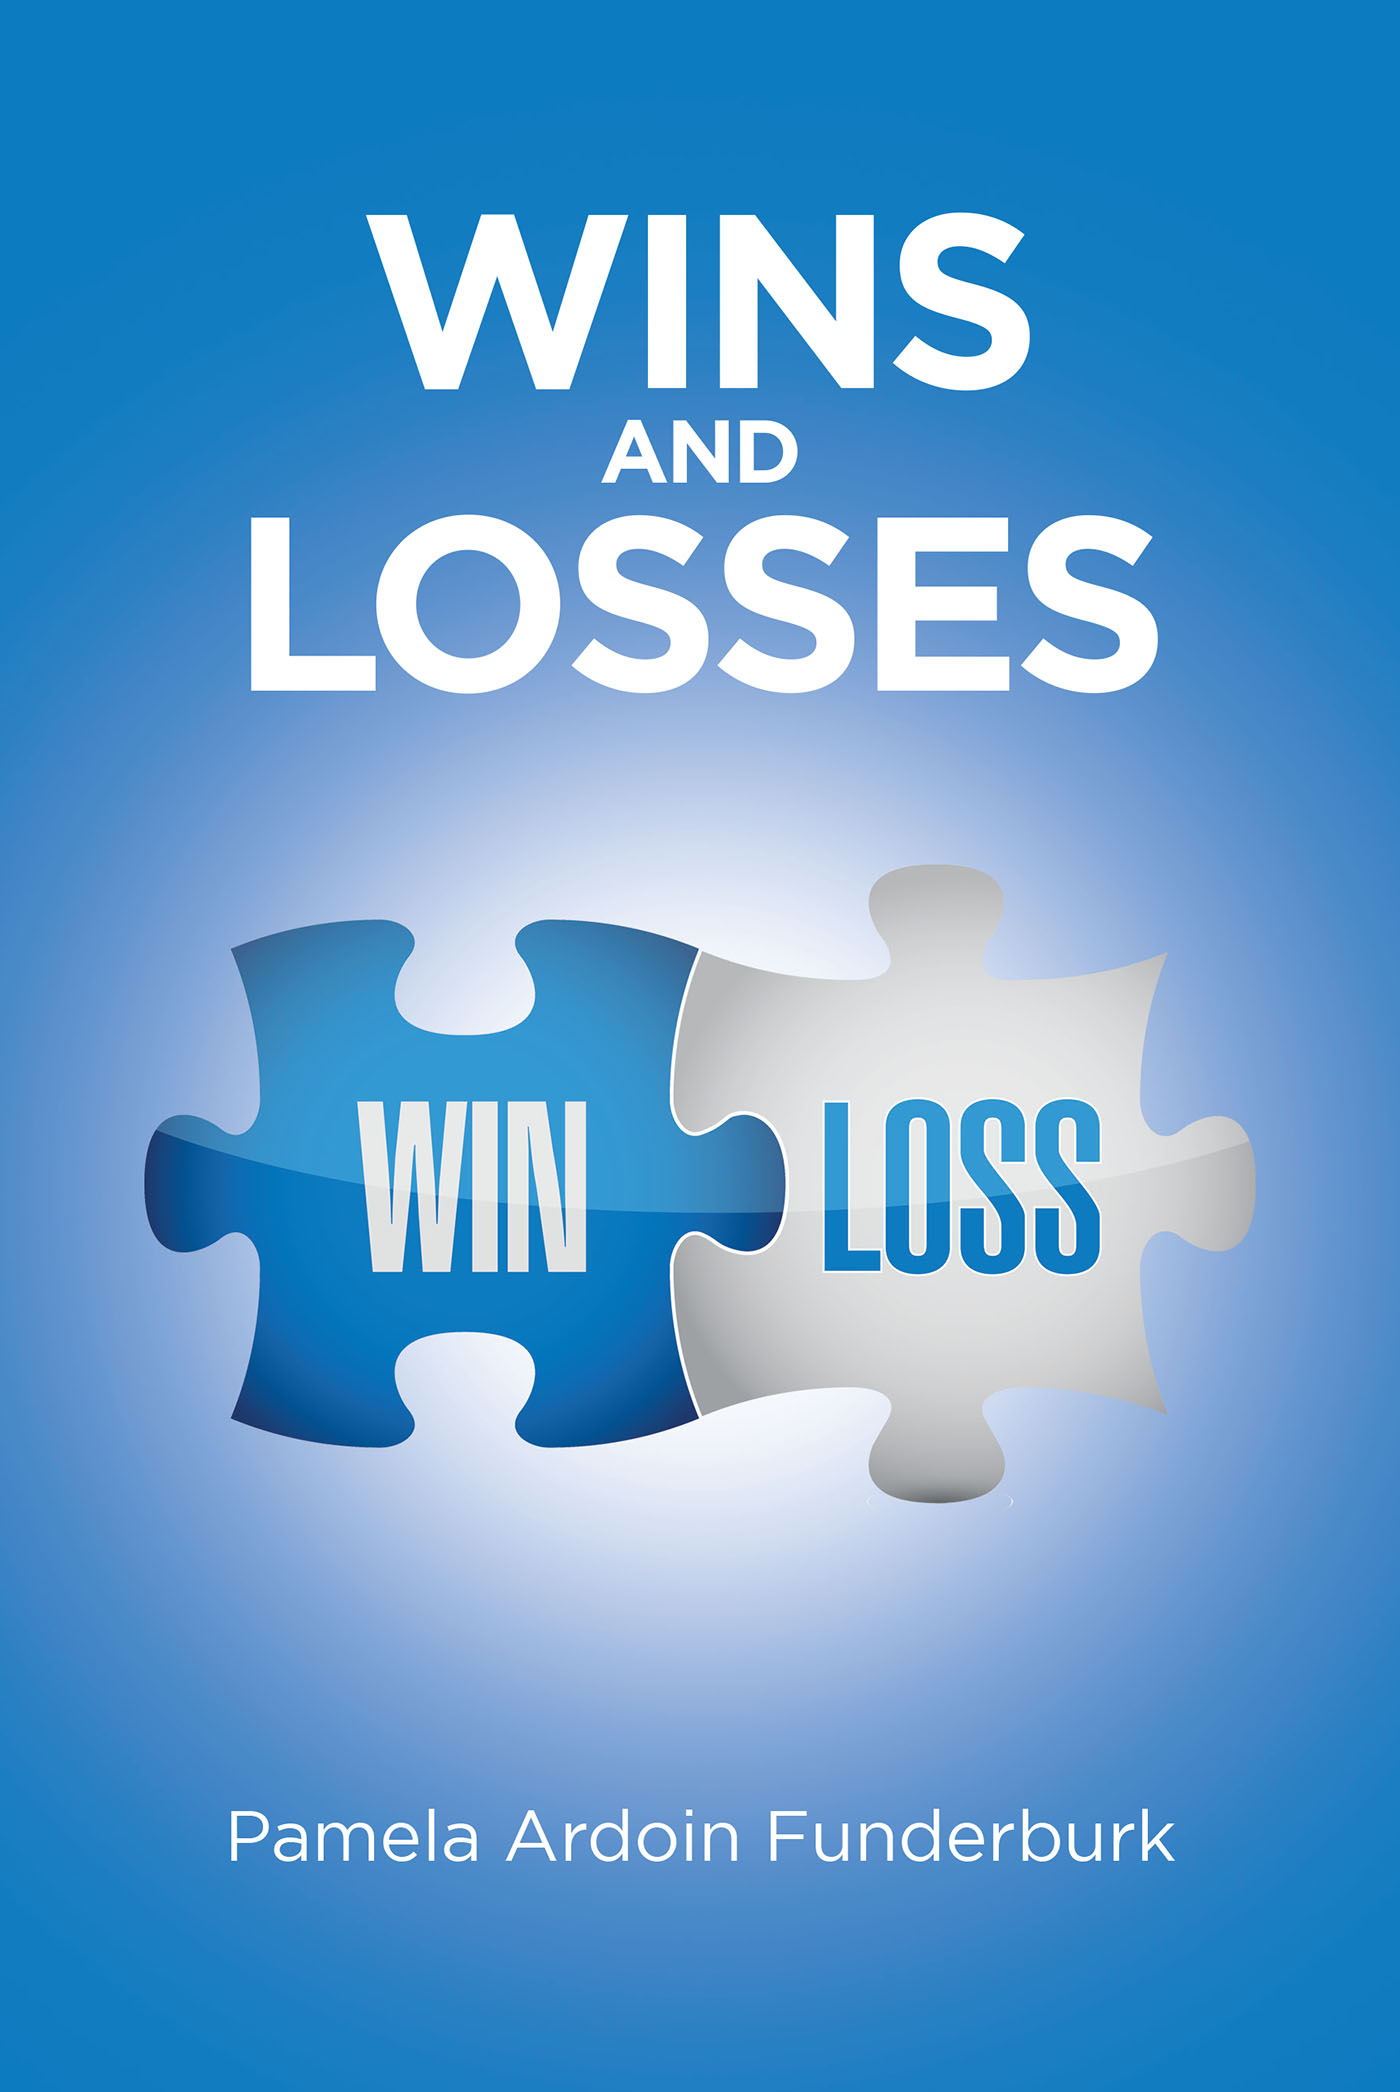 Pamela Ardoin Funderburk’s New Book, "Wins and Losses," is a Captivating Story About the High Peaks and Low Valleys of Life as Experienced by a Loving Family